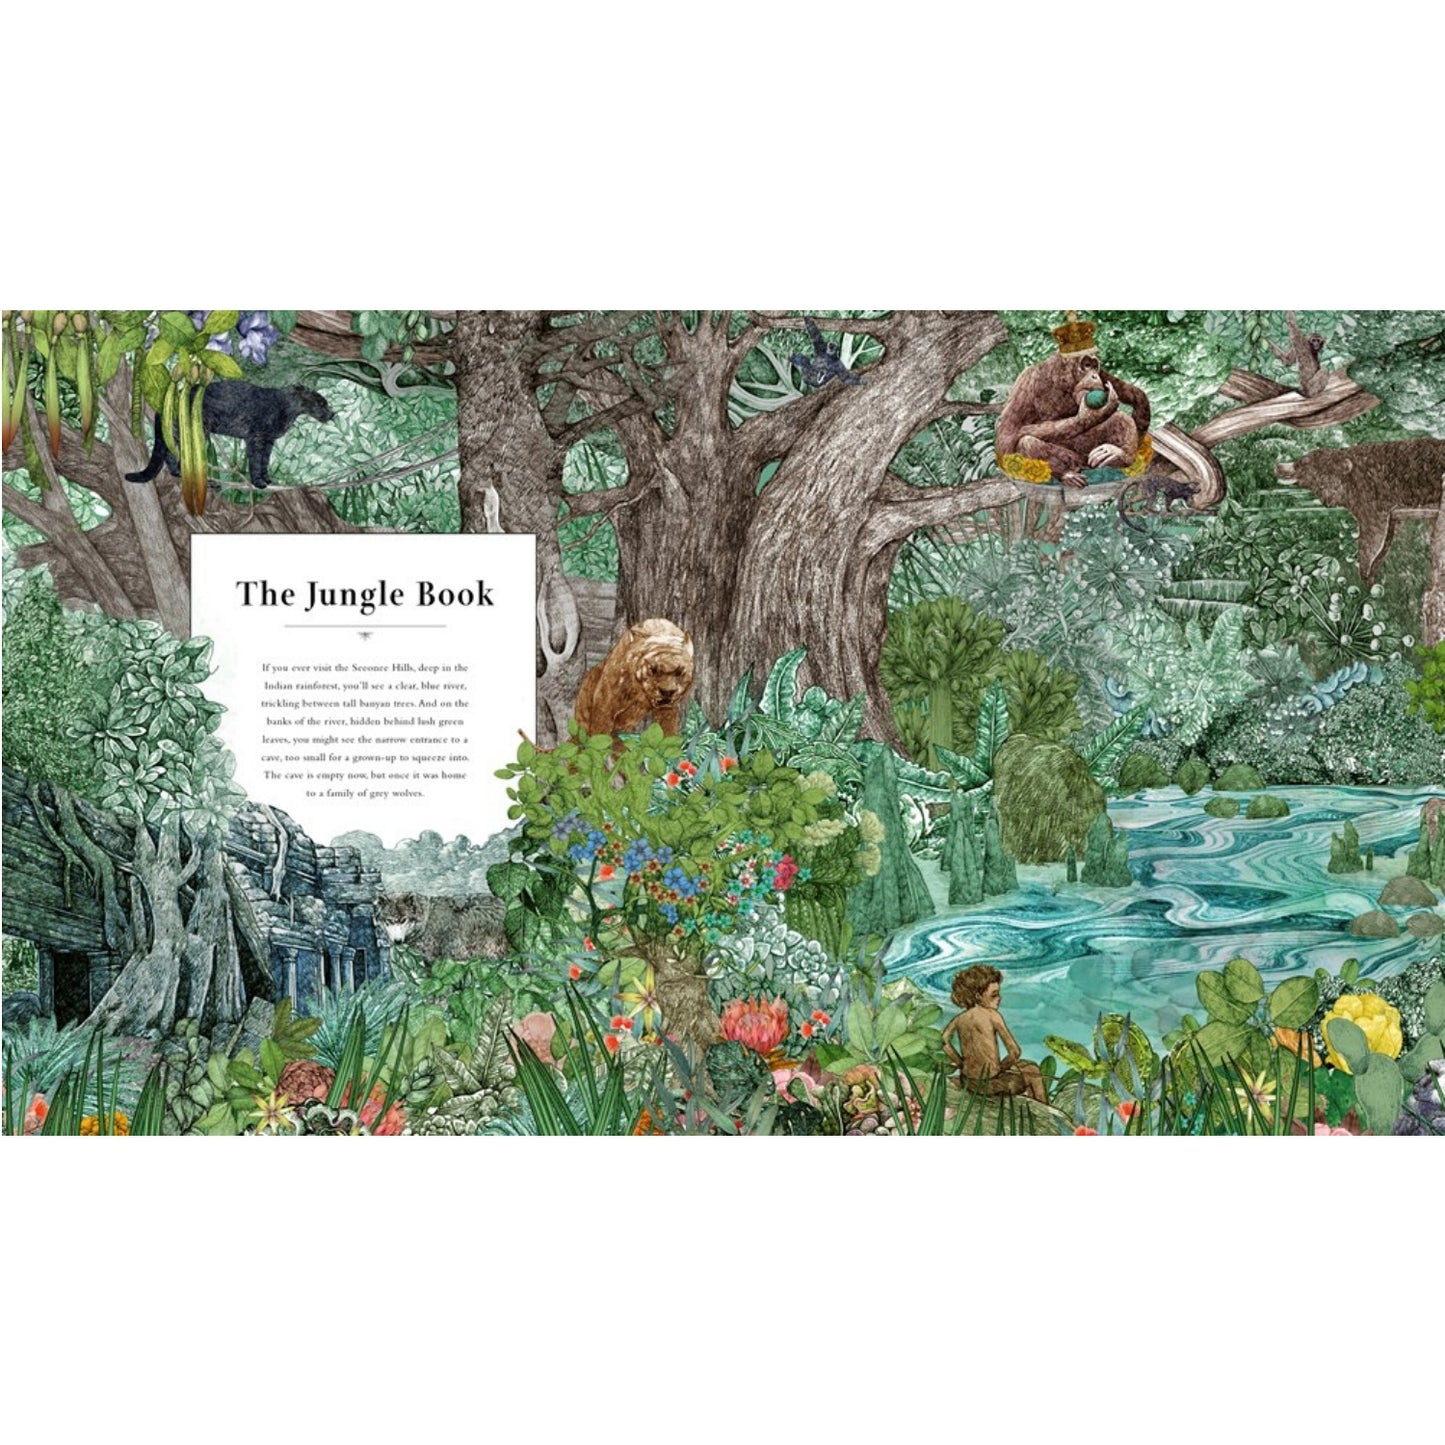 Fairy Tale Land - 12 Classic Tales Reimagined | Children's Book on Tales and Stories